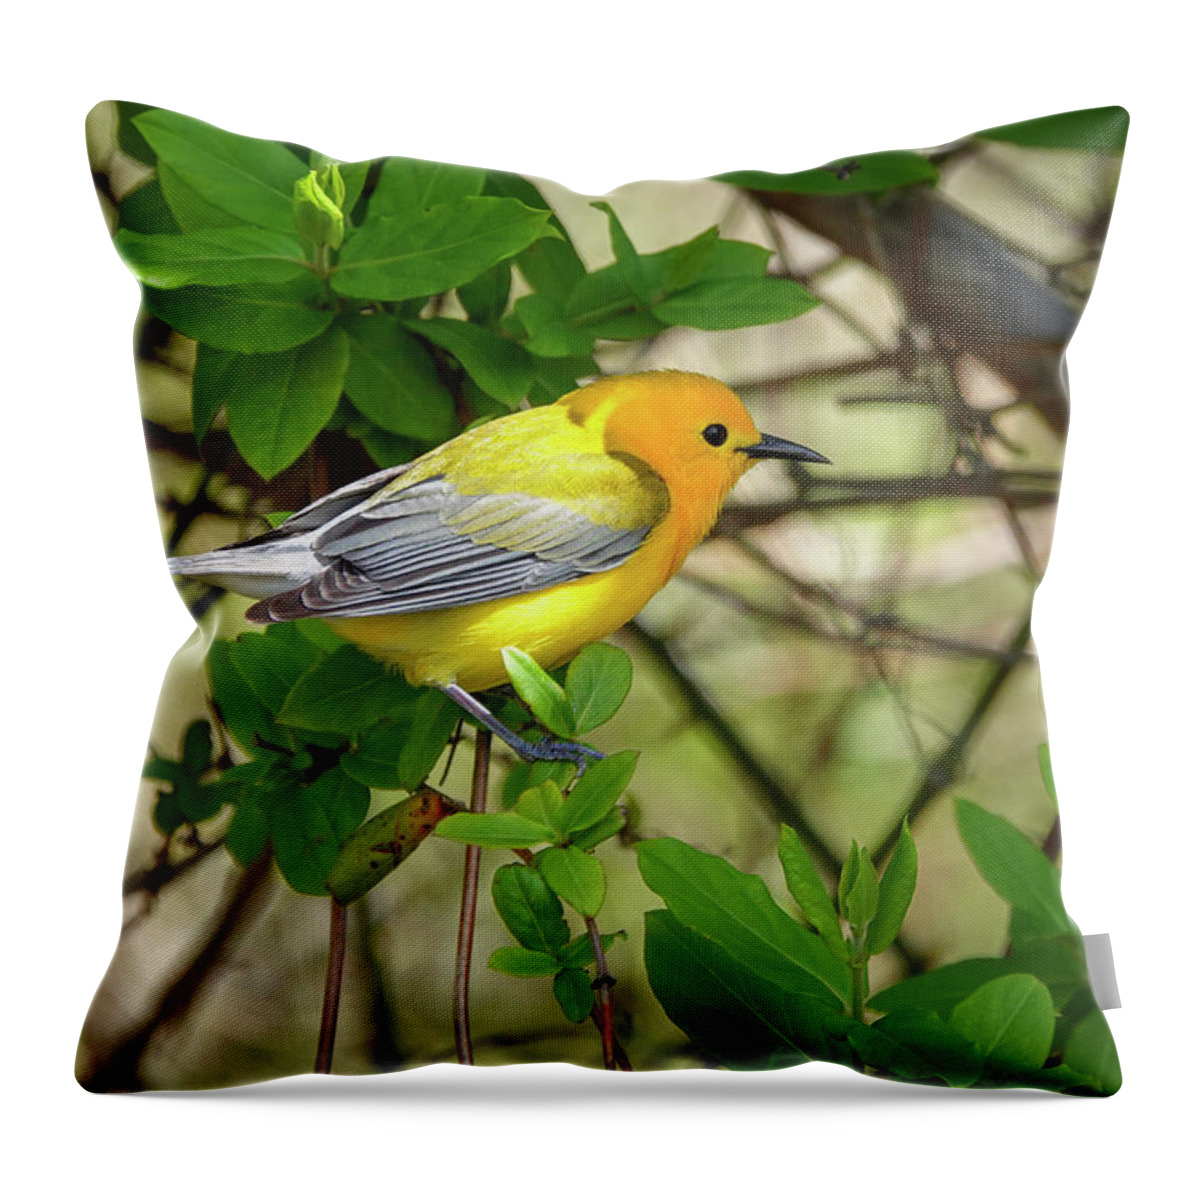 Prothonotary Warbler Throw Pillow featuring the photograph Prothonotary Warbler by Jack Nevitt